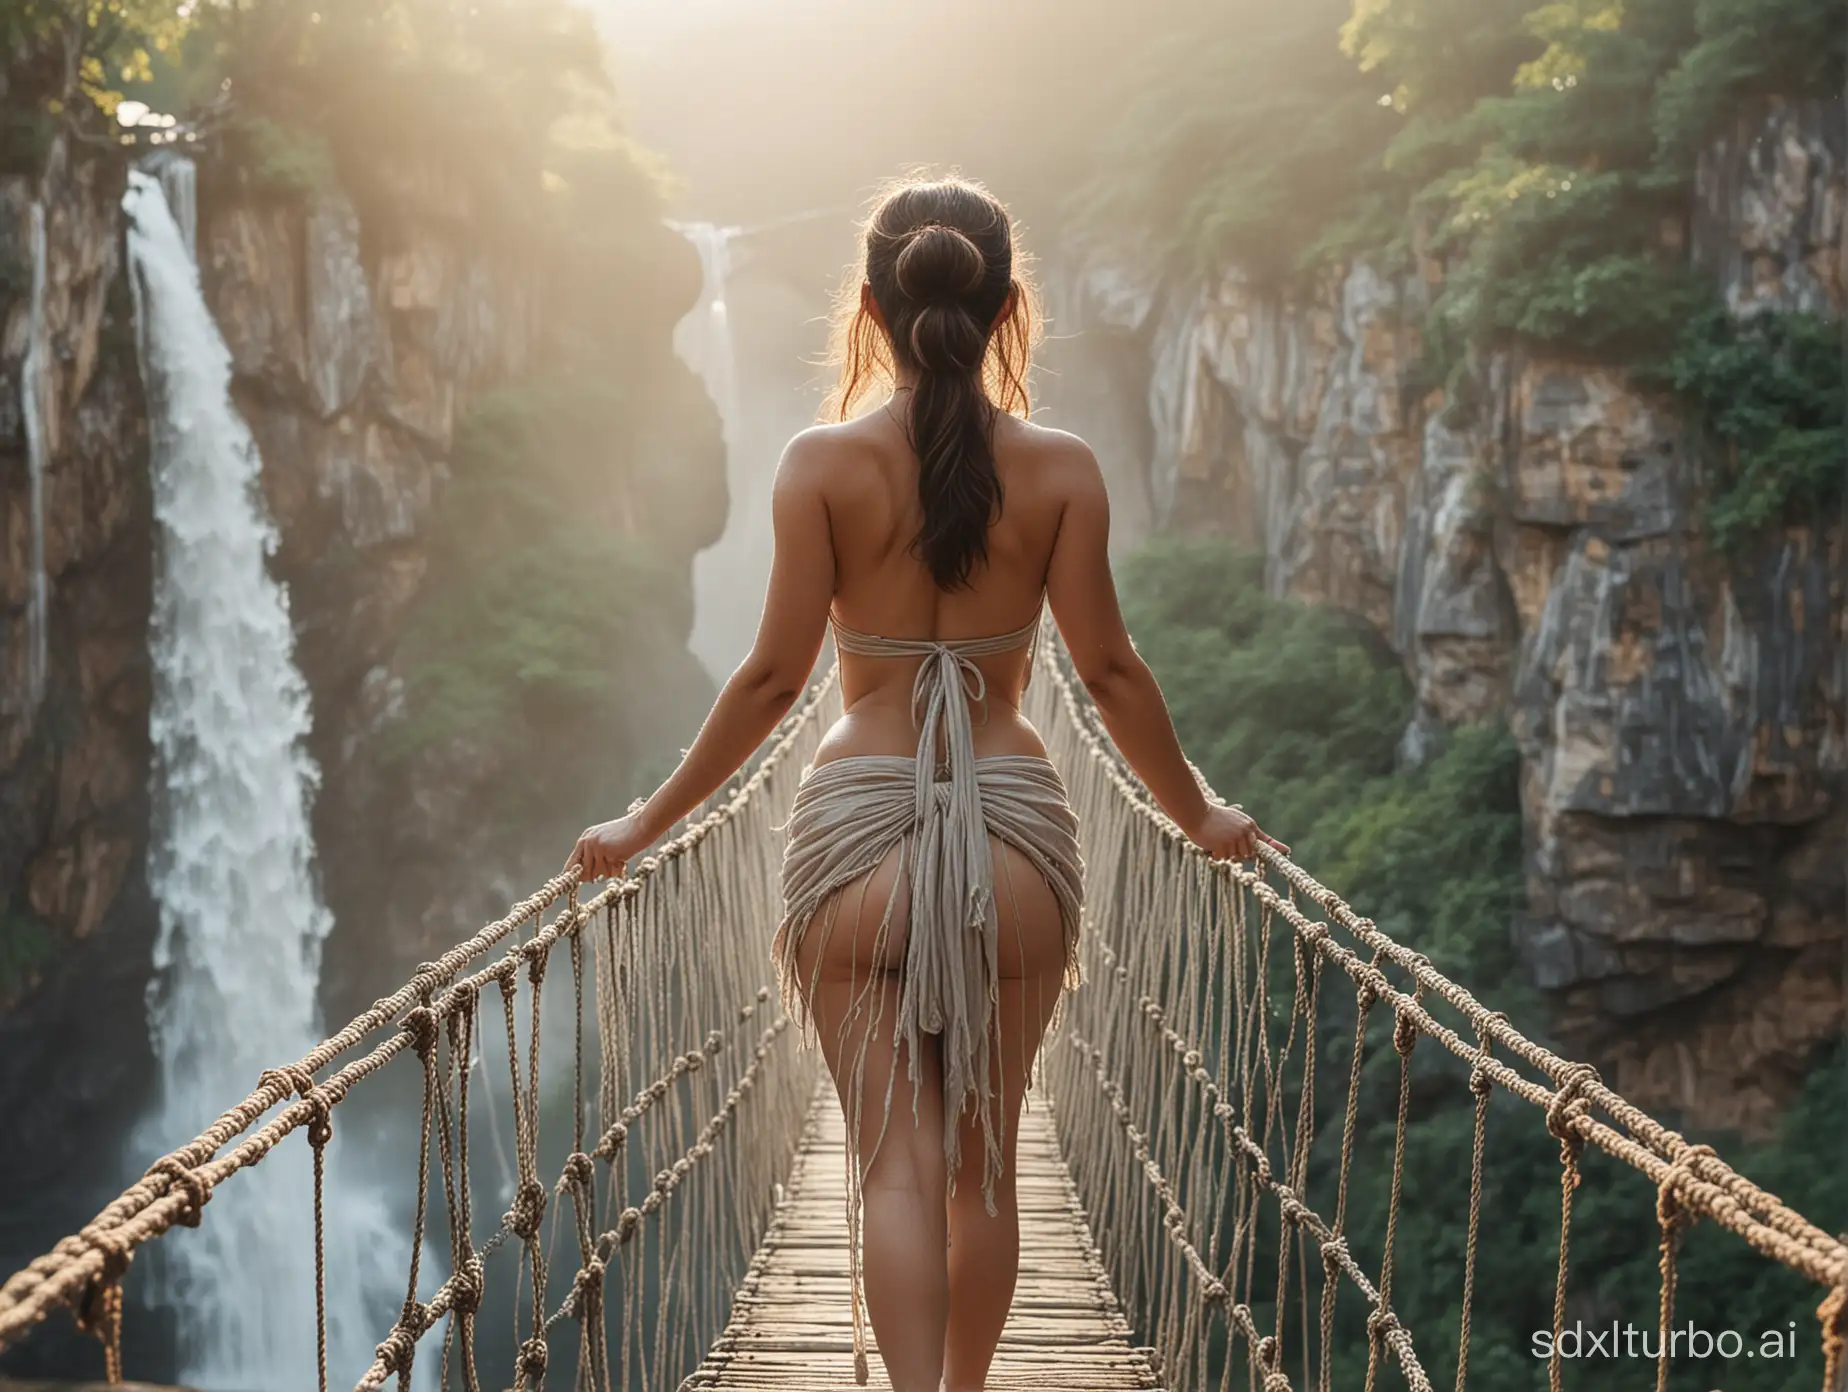 Back of 40 years old filipina lady walking on extremely long  old rope suspension bridge high above waterfalls. morning mist. Sunrise, sun rays. Wearing unbuttoned open loincloth. Revealing. Profusely sweating. Completely Wet. Headband. Medieval time. Film grain, soft lighting. Bokeh. Fat Legs. Freckles skin. Small flat breasts. Hair tied. Full body. Naked hips. Deep V cut. Seducing face. Sexy. Artistic photo from behind. 